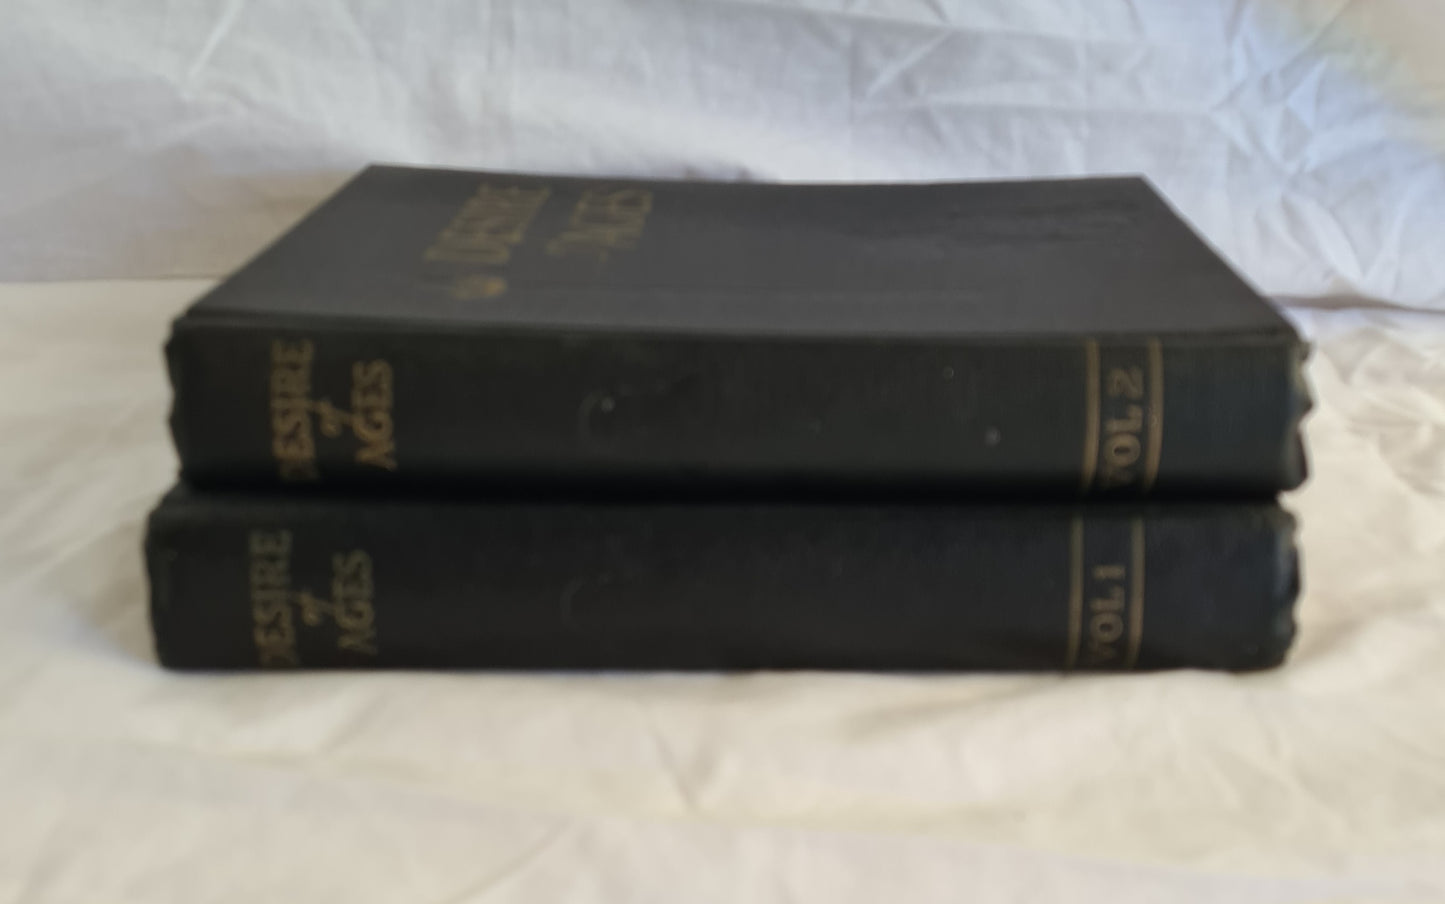 The Desire of Ages by Mrs. E. G. White (Volumes 1 and 2)